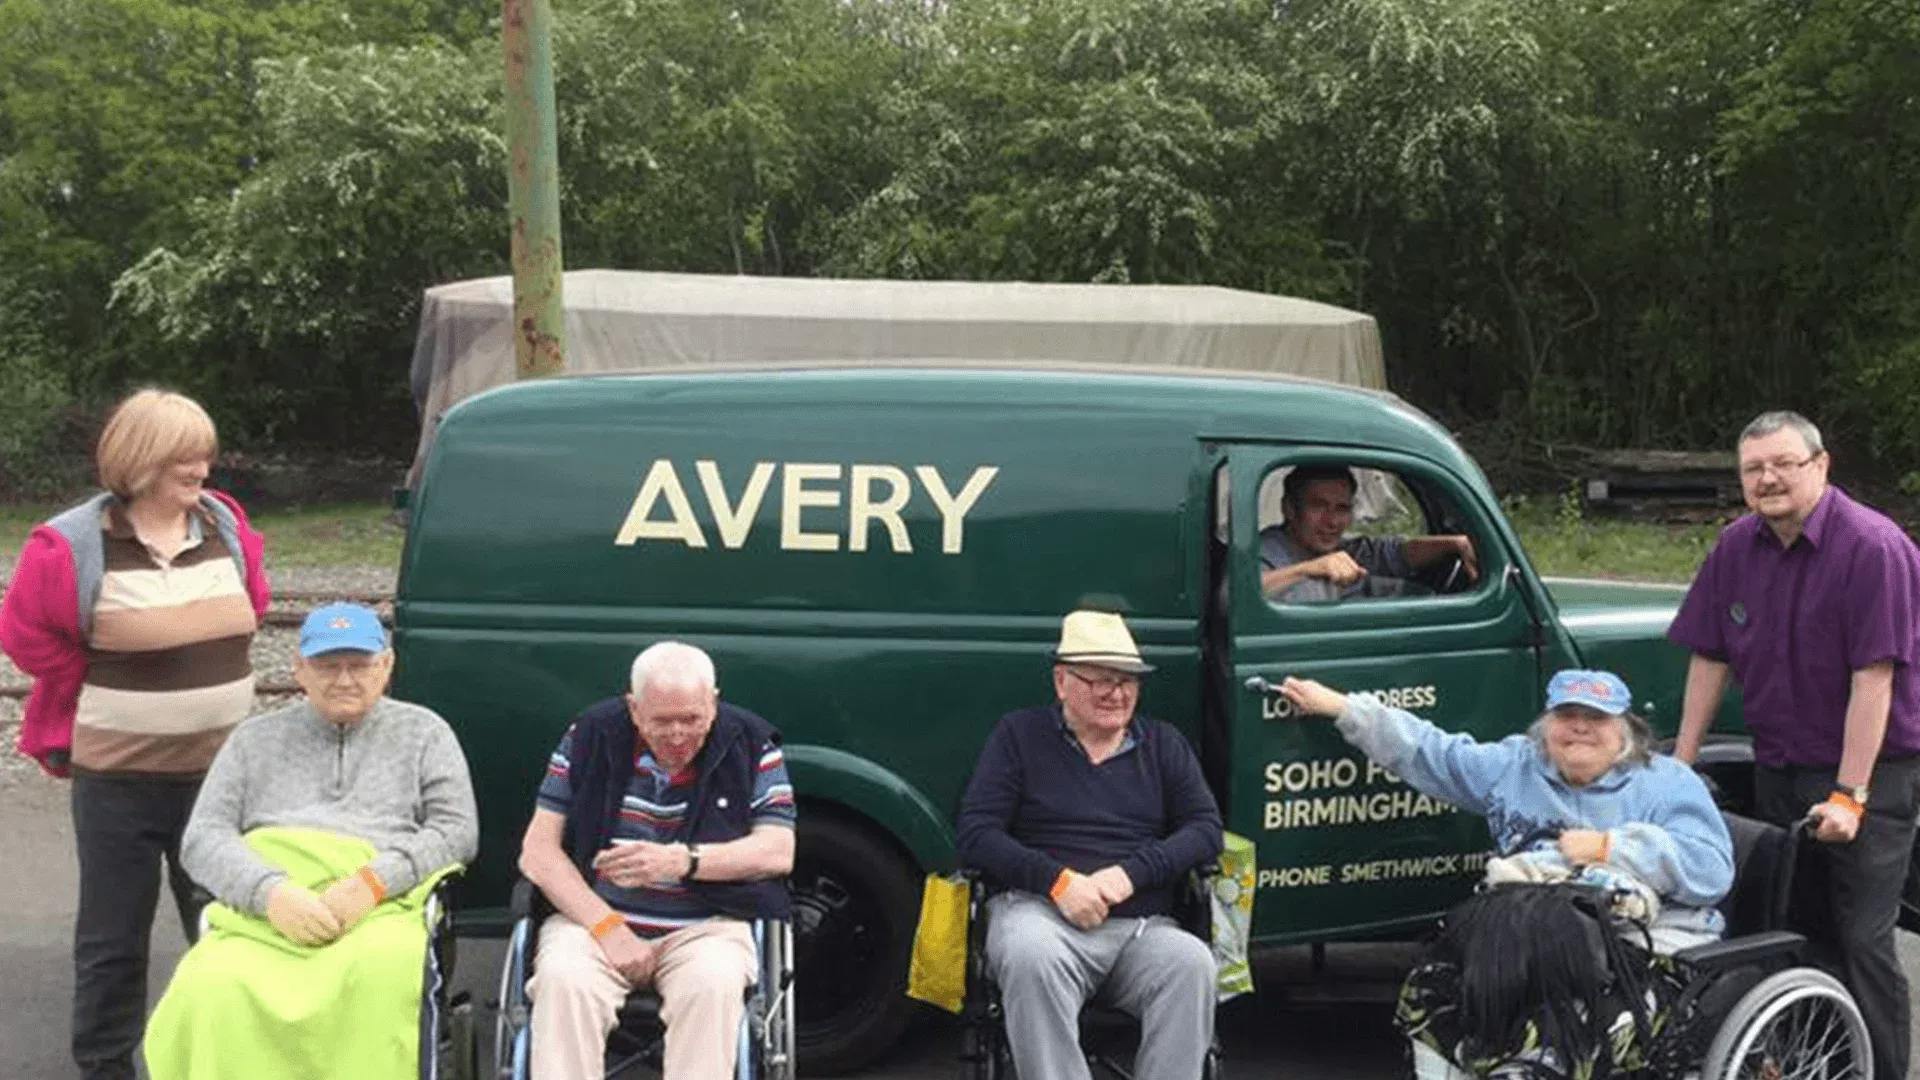 Avery Healthcare - St Giles care home 5